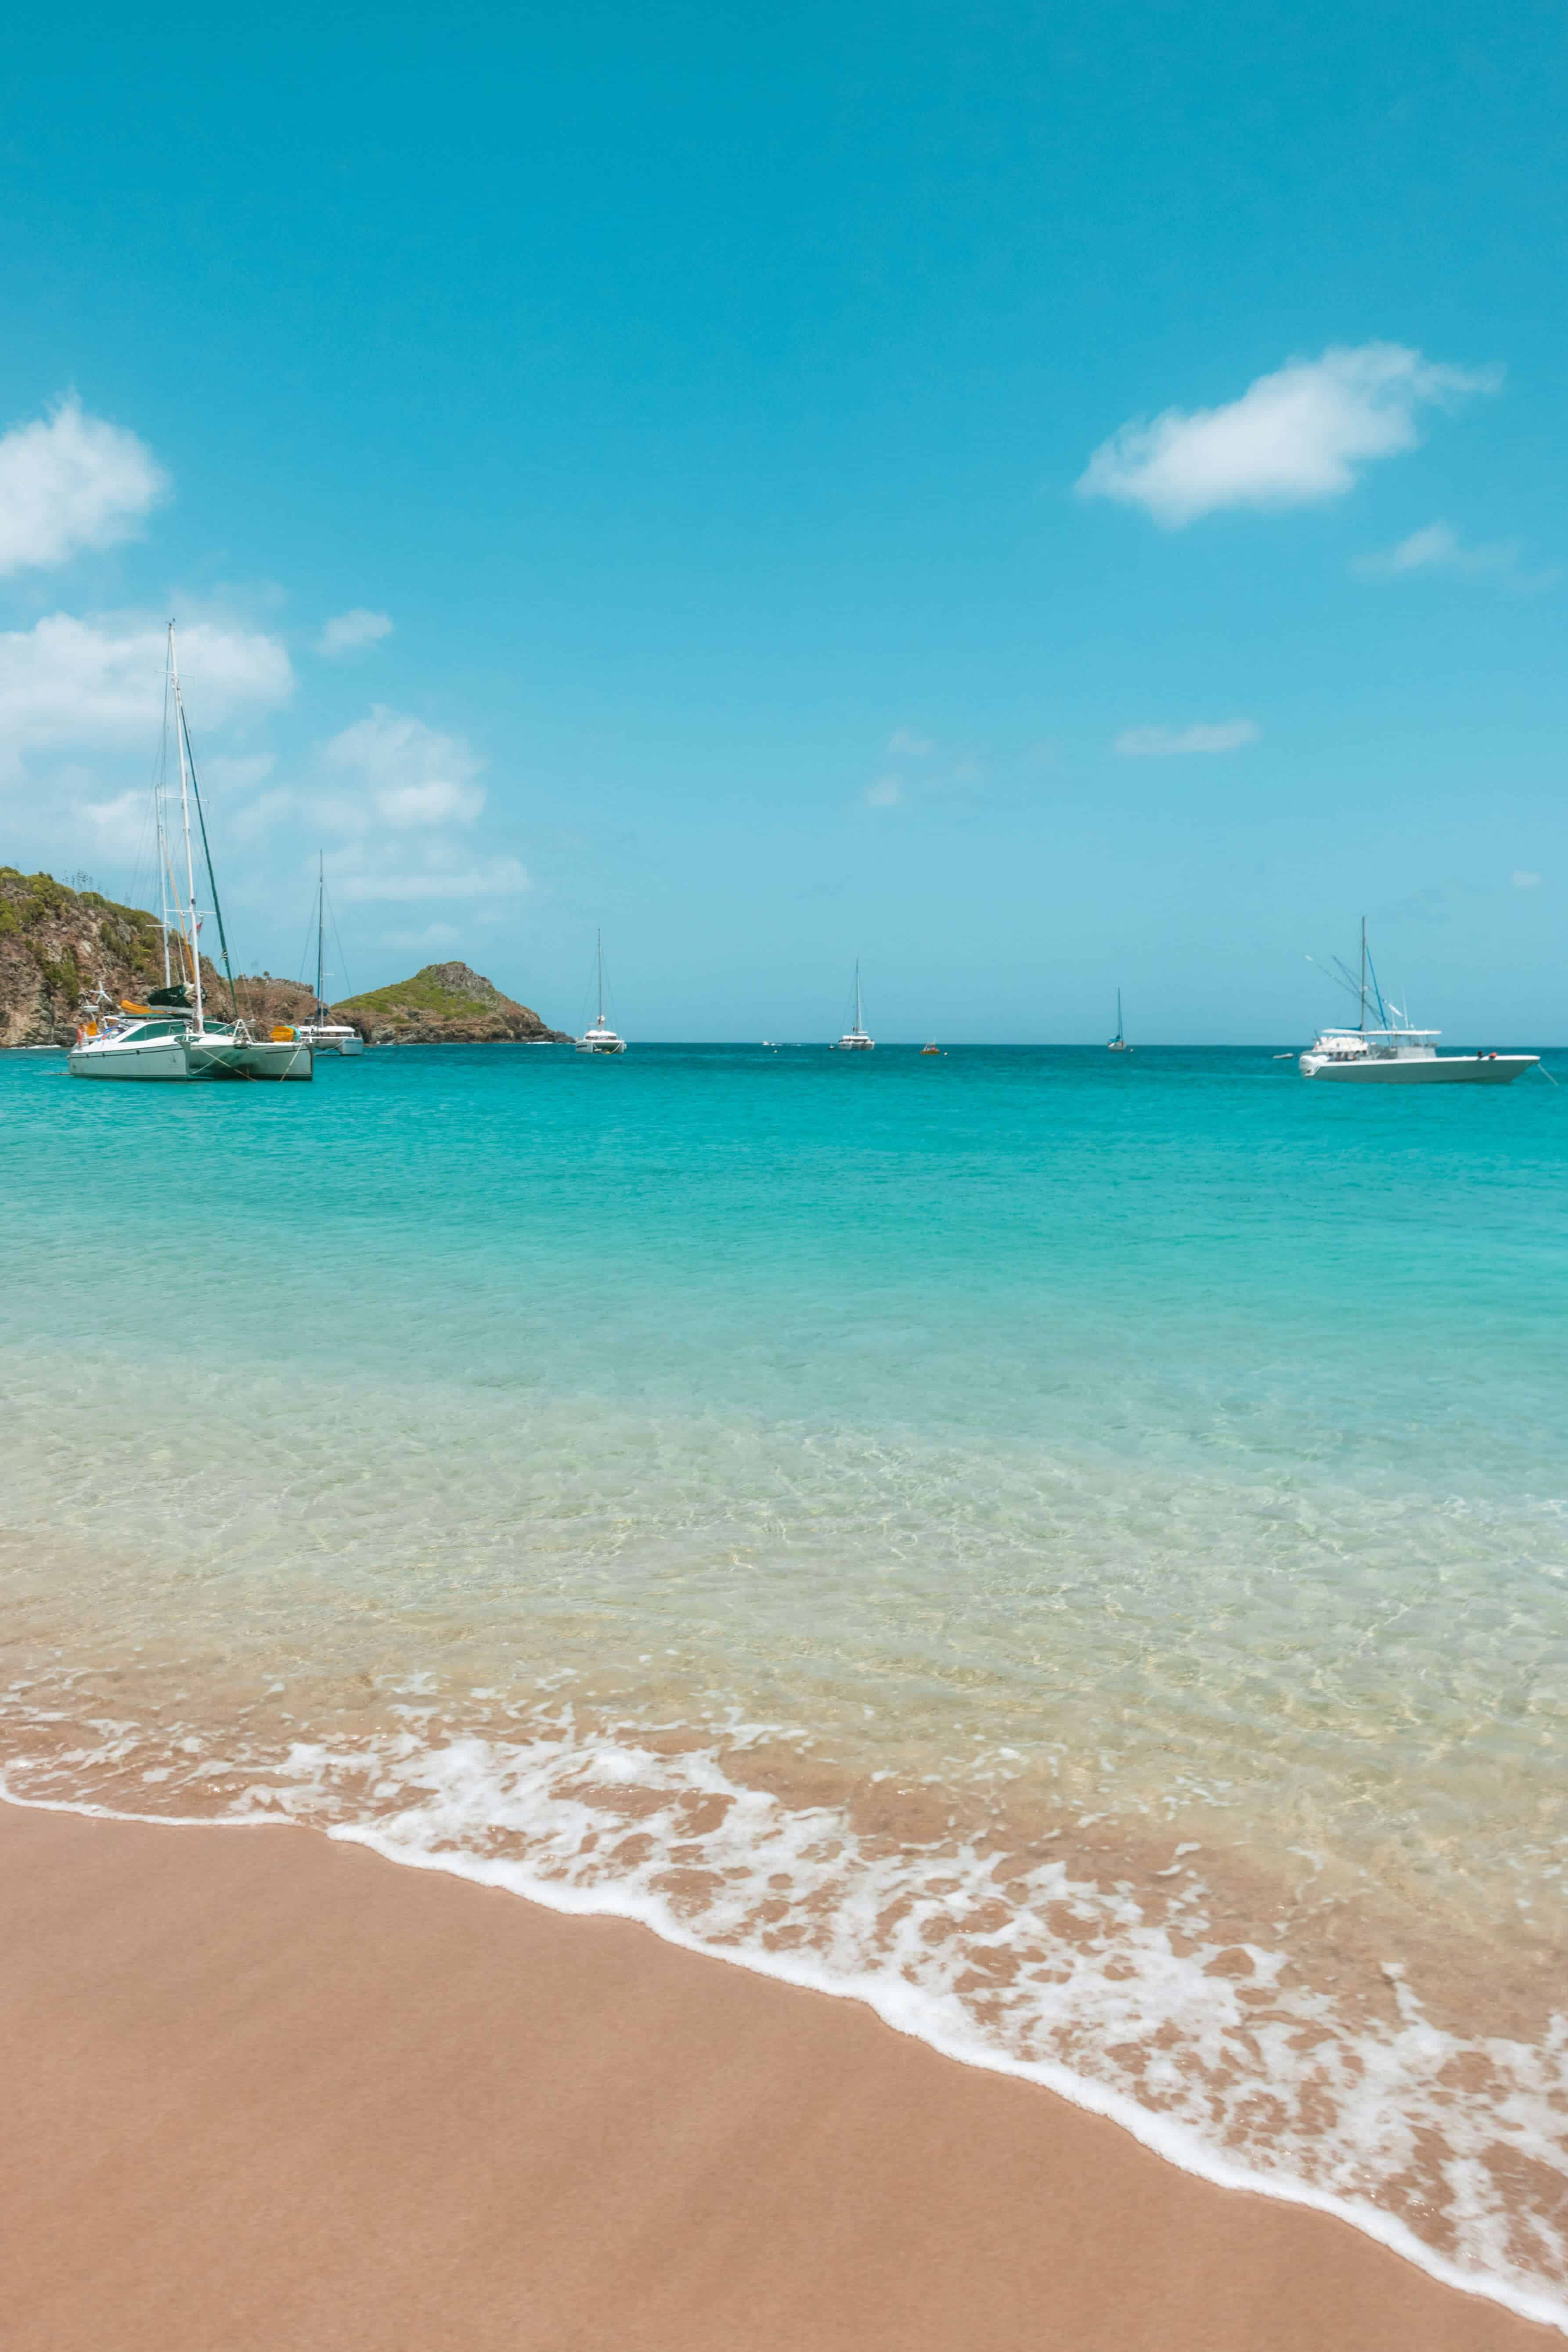 The Best Time to Visit St Barts